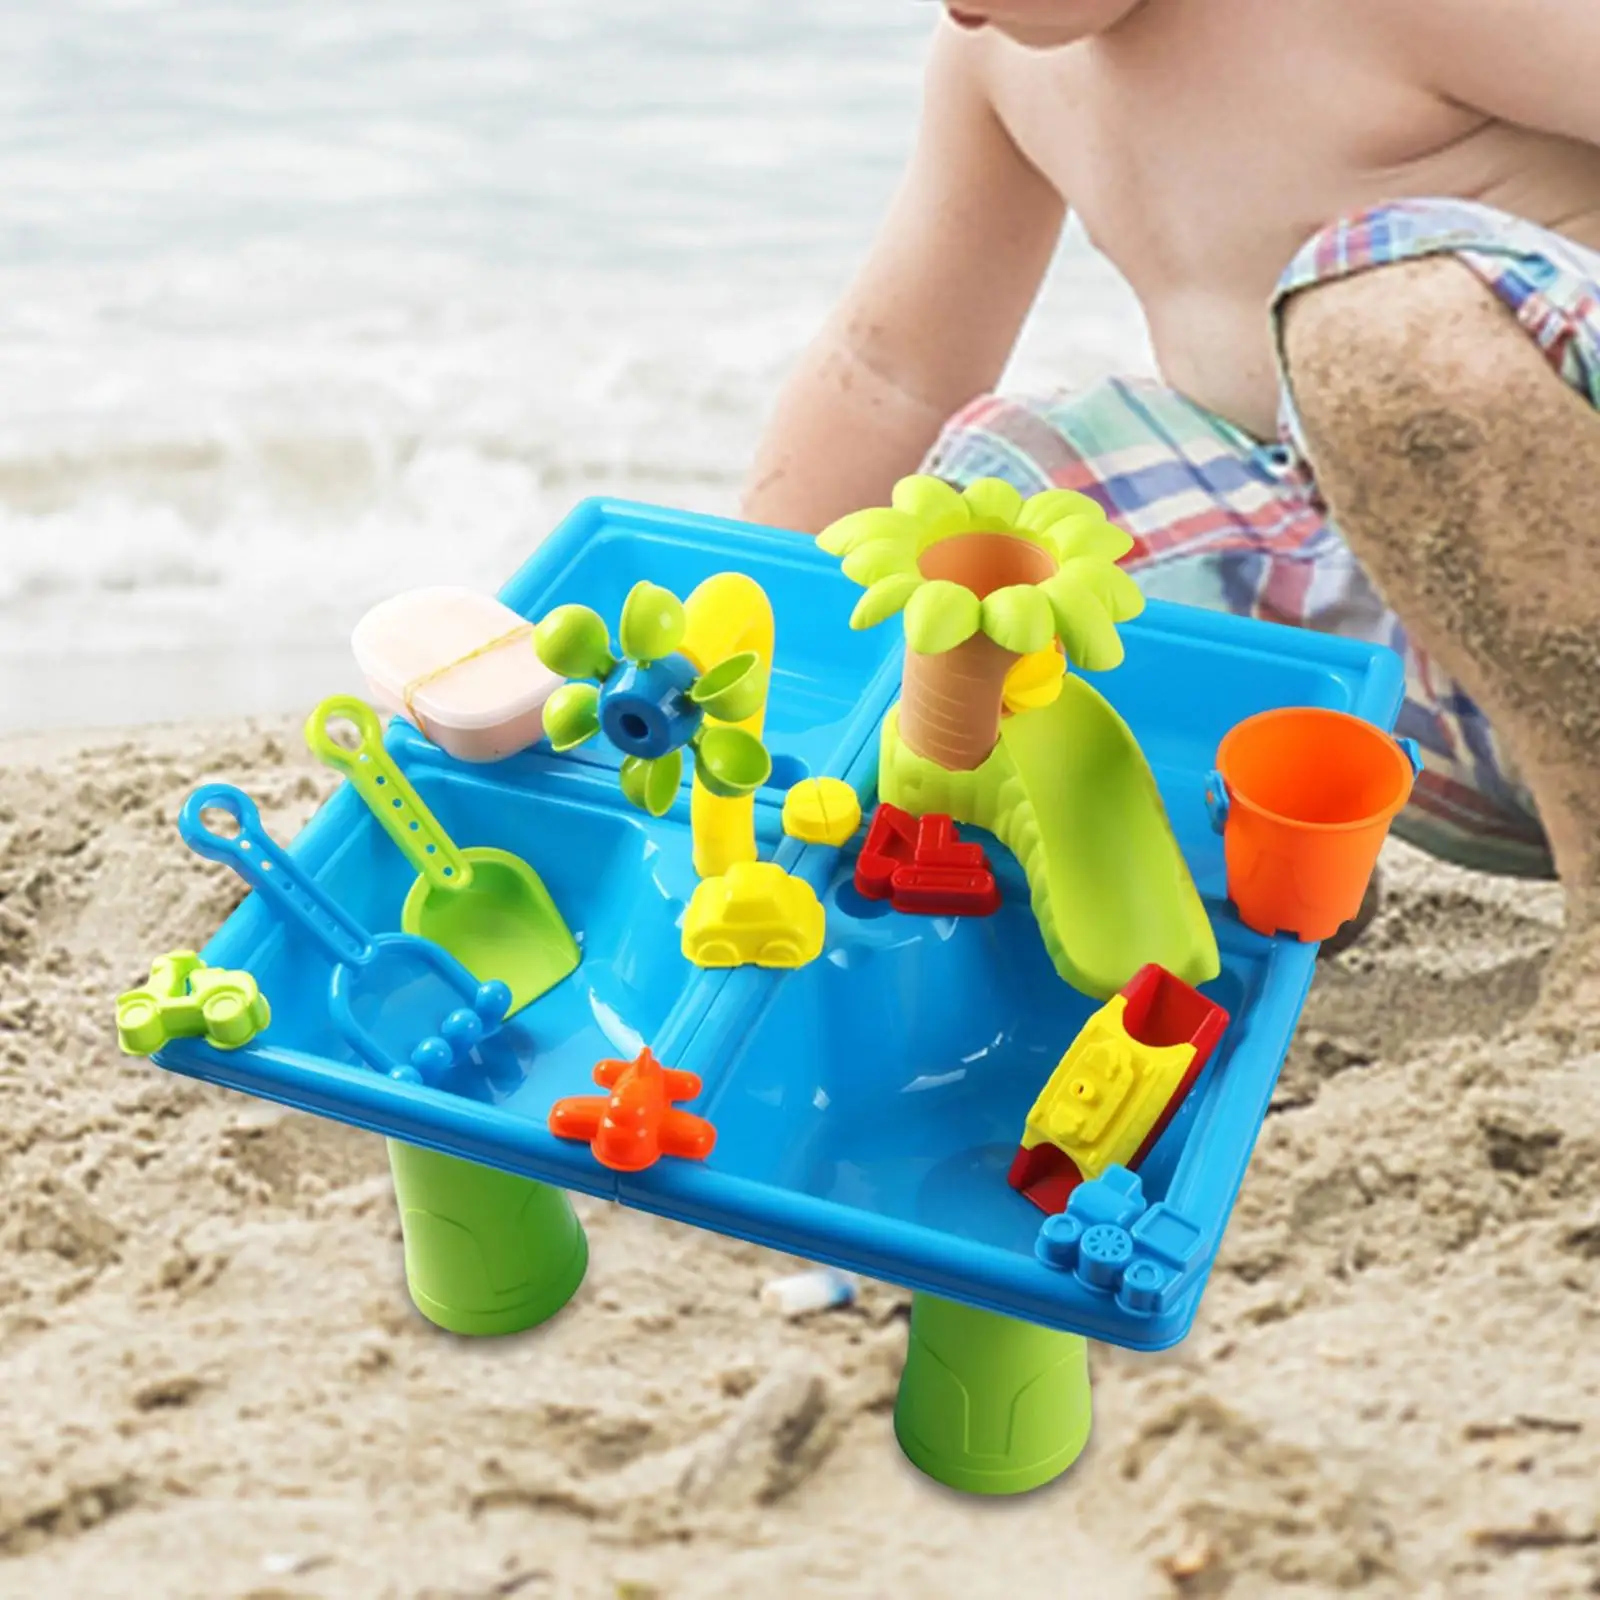 24 Pieces Sand Water Table Sensory Toys Beach Sandbox Table Playset for Children Girls Boys Toddler Kids Birthday Gifts